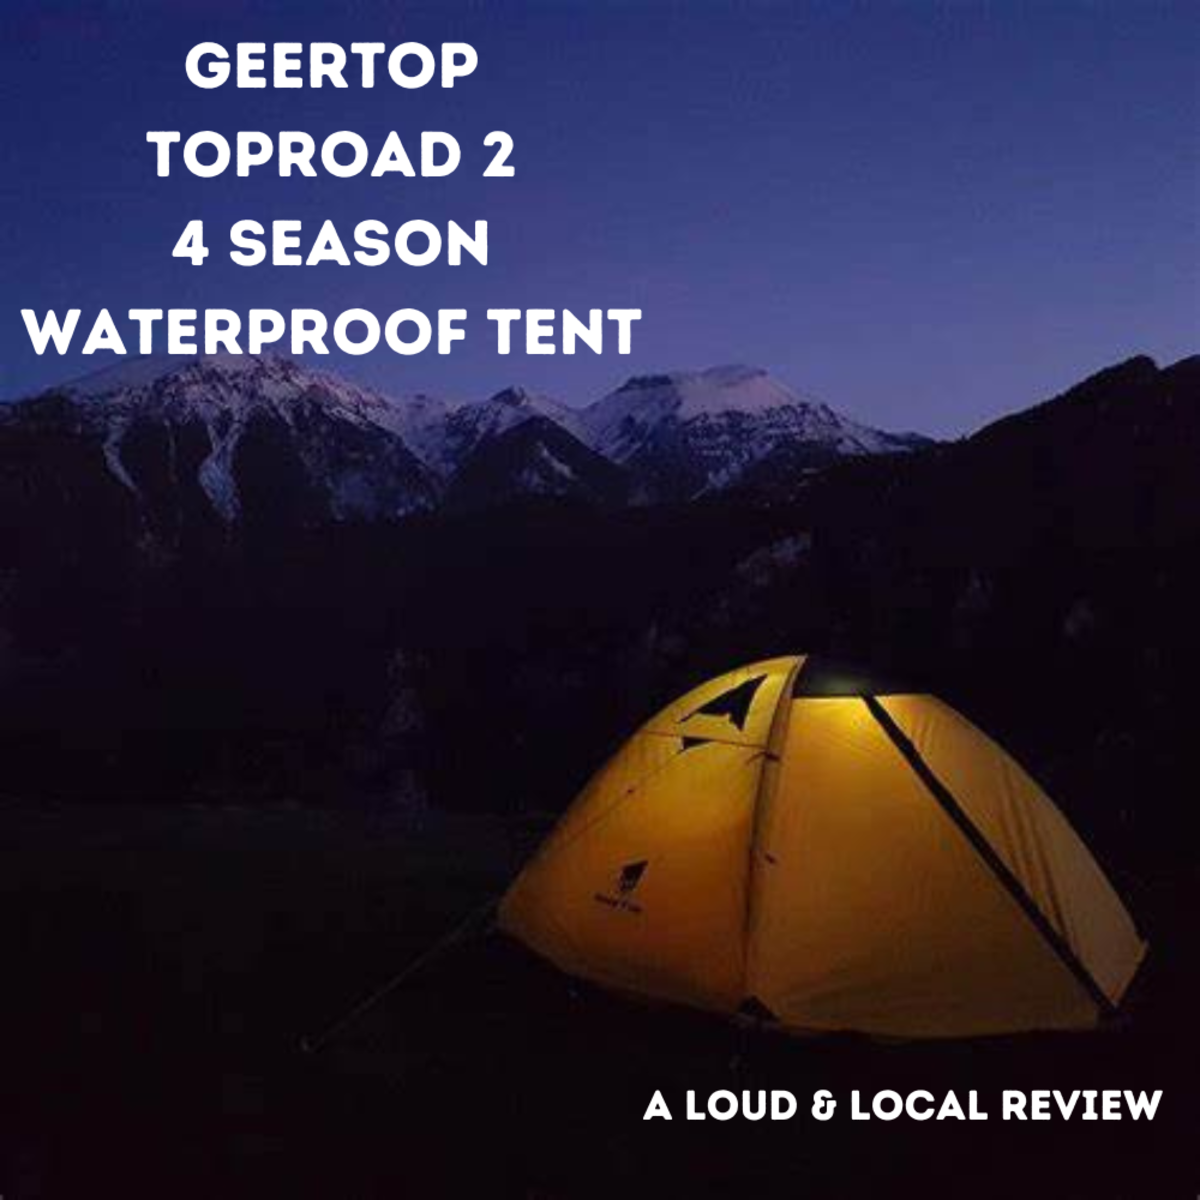 Amazon's Top Rated Budget Camping Tent Review: The Geertop Toproad 2